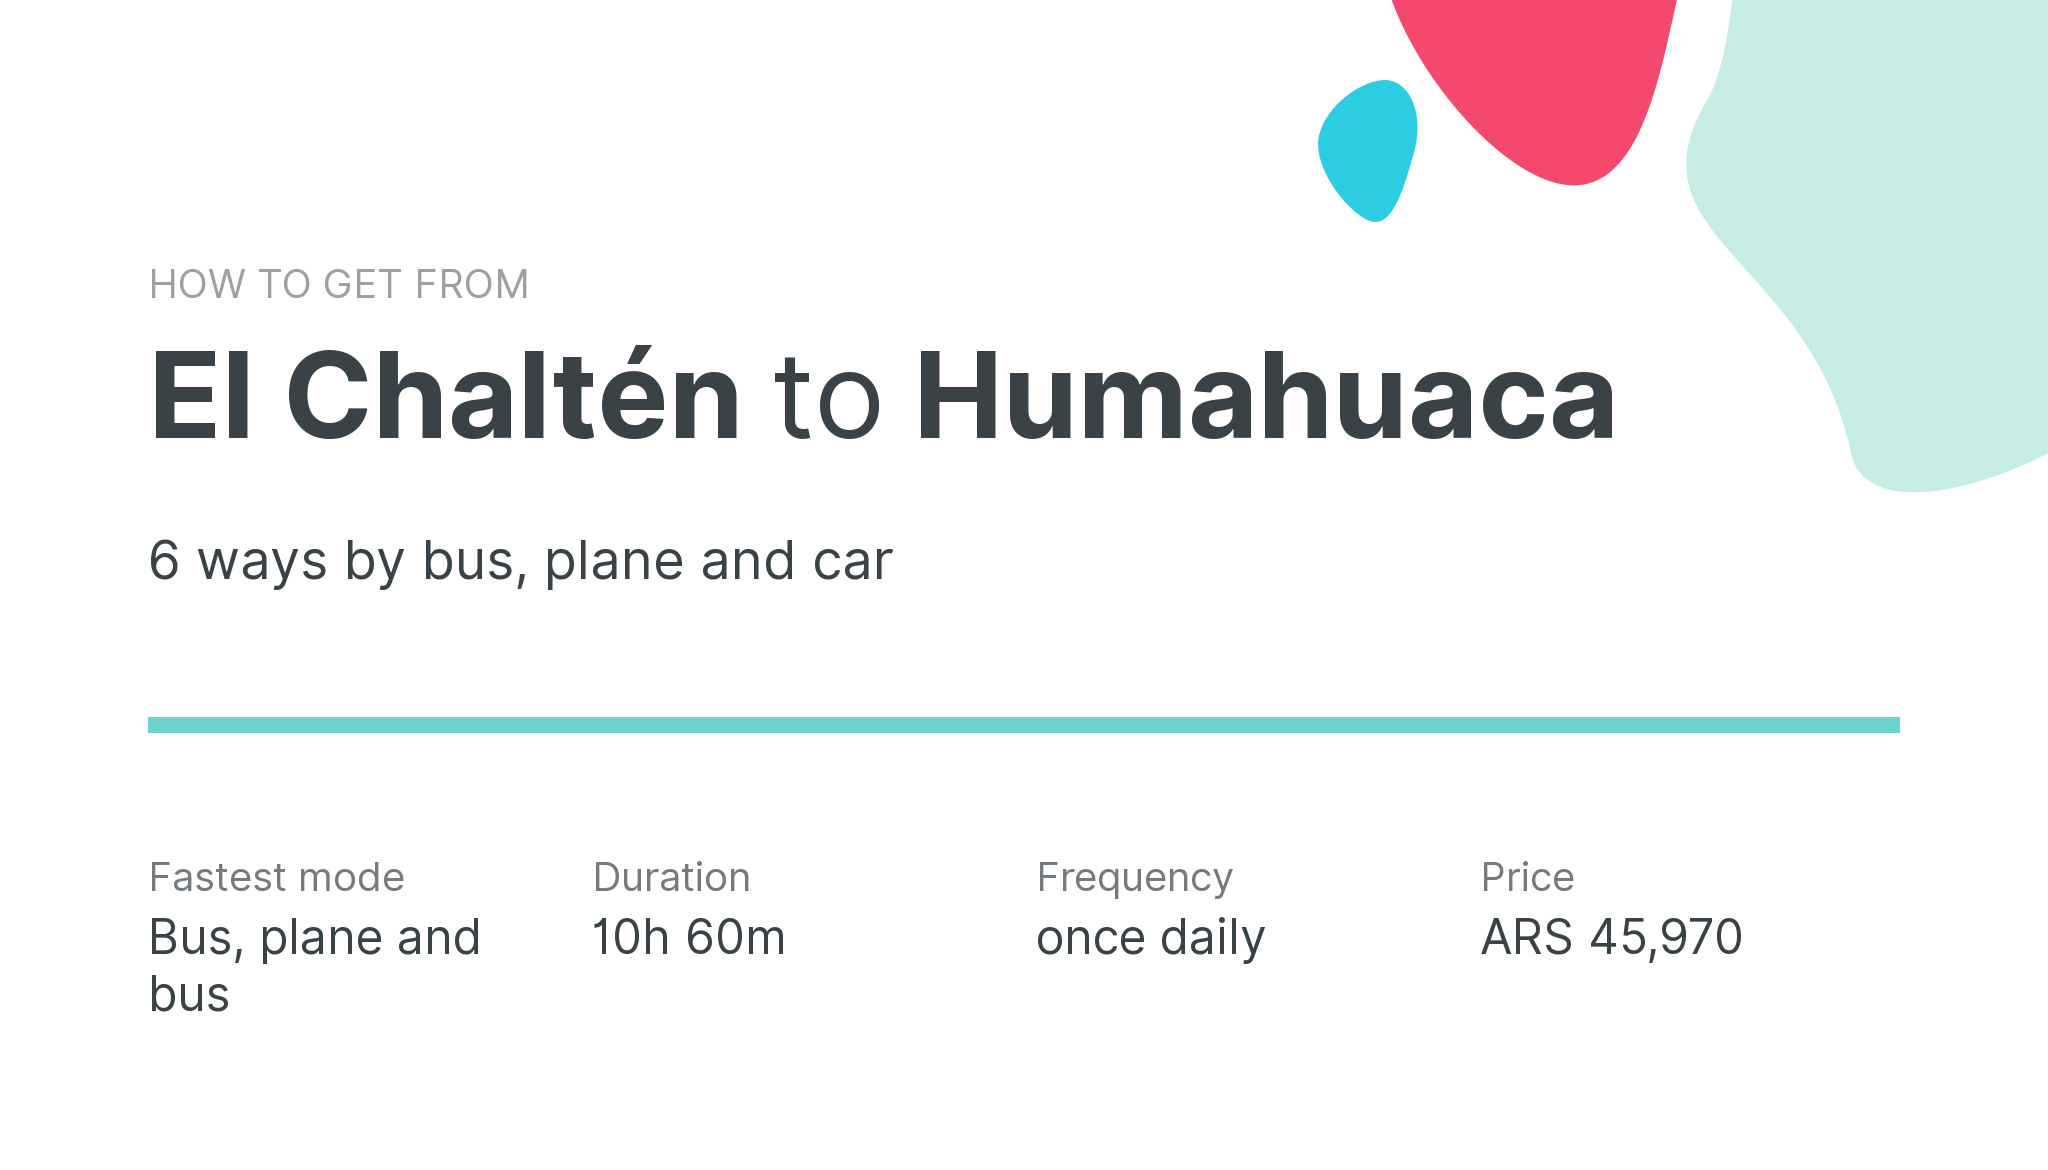 How do I get from El Chaltén to Humahuaca